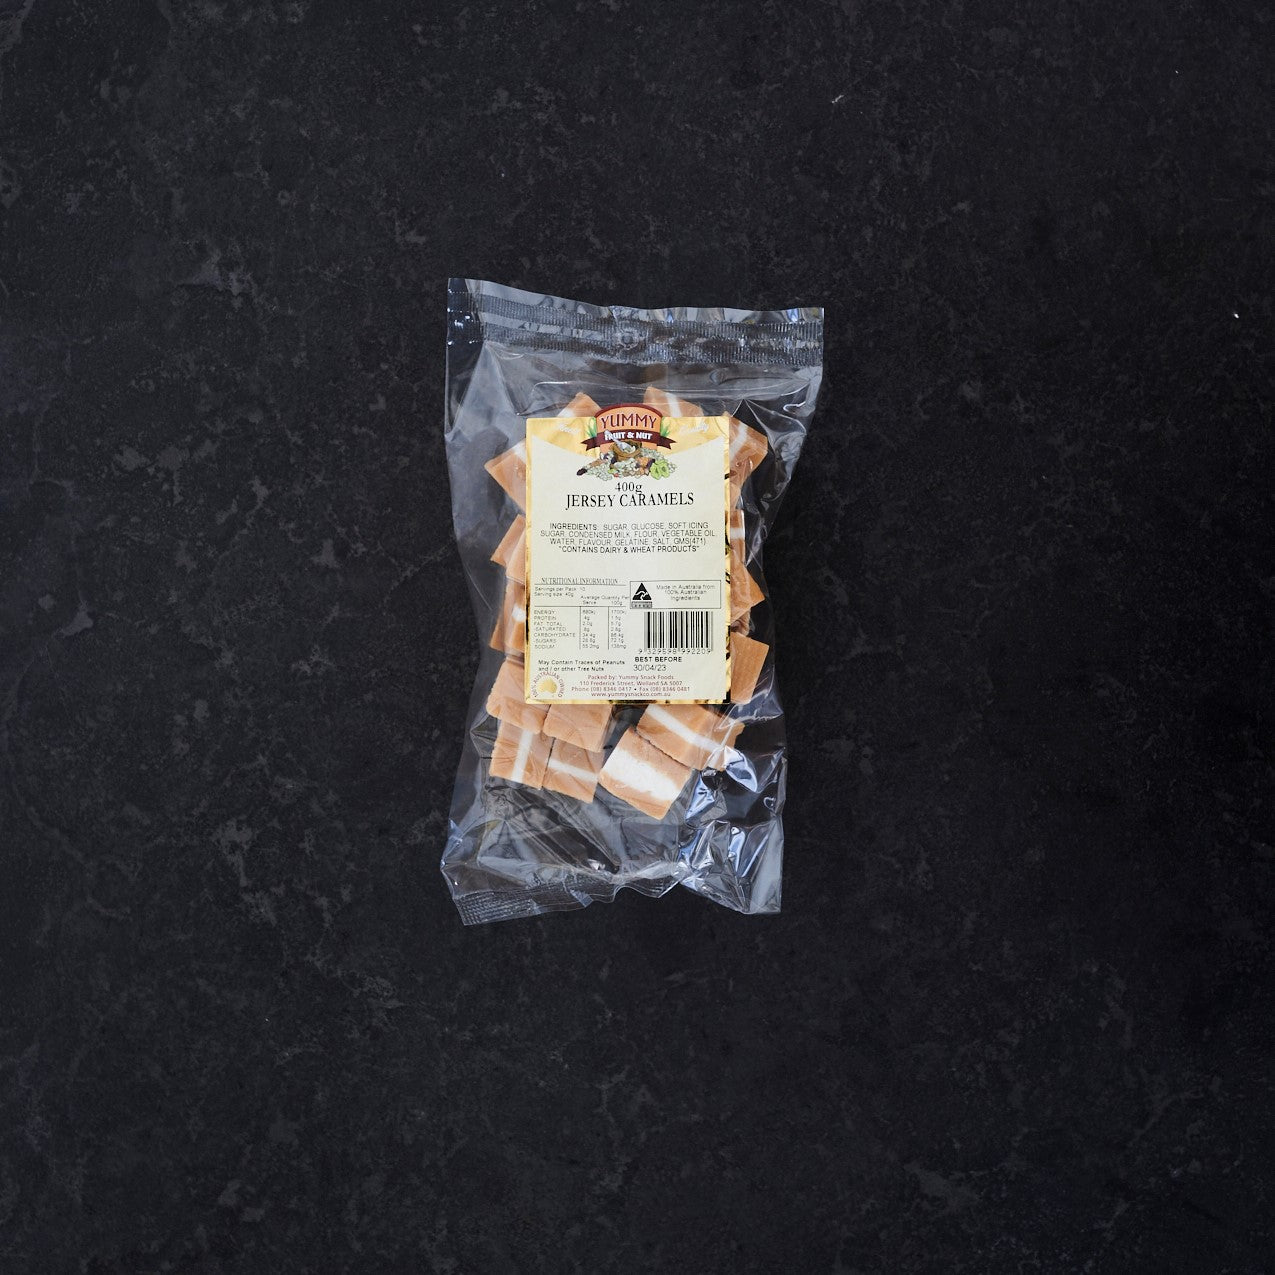 Yummy Snack Co Jersey Caramels 400g